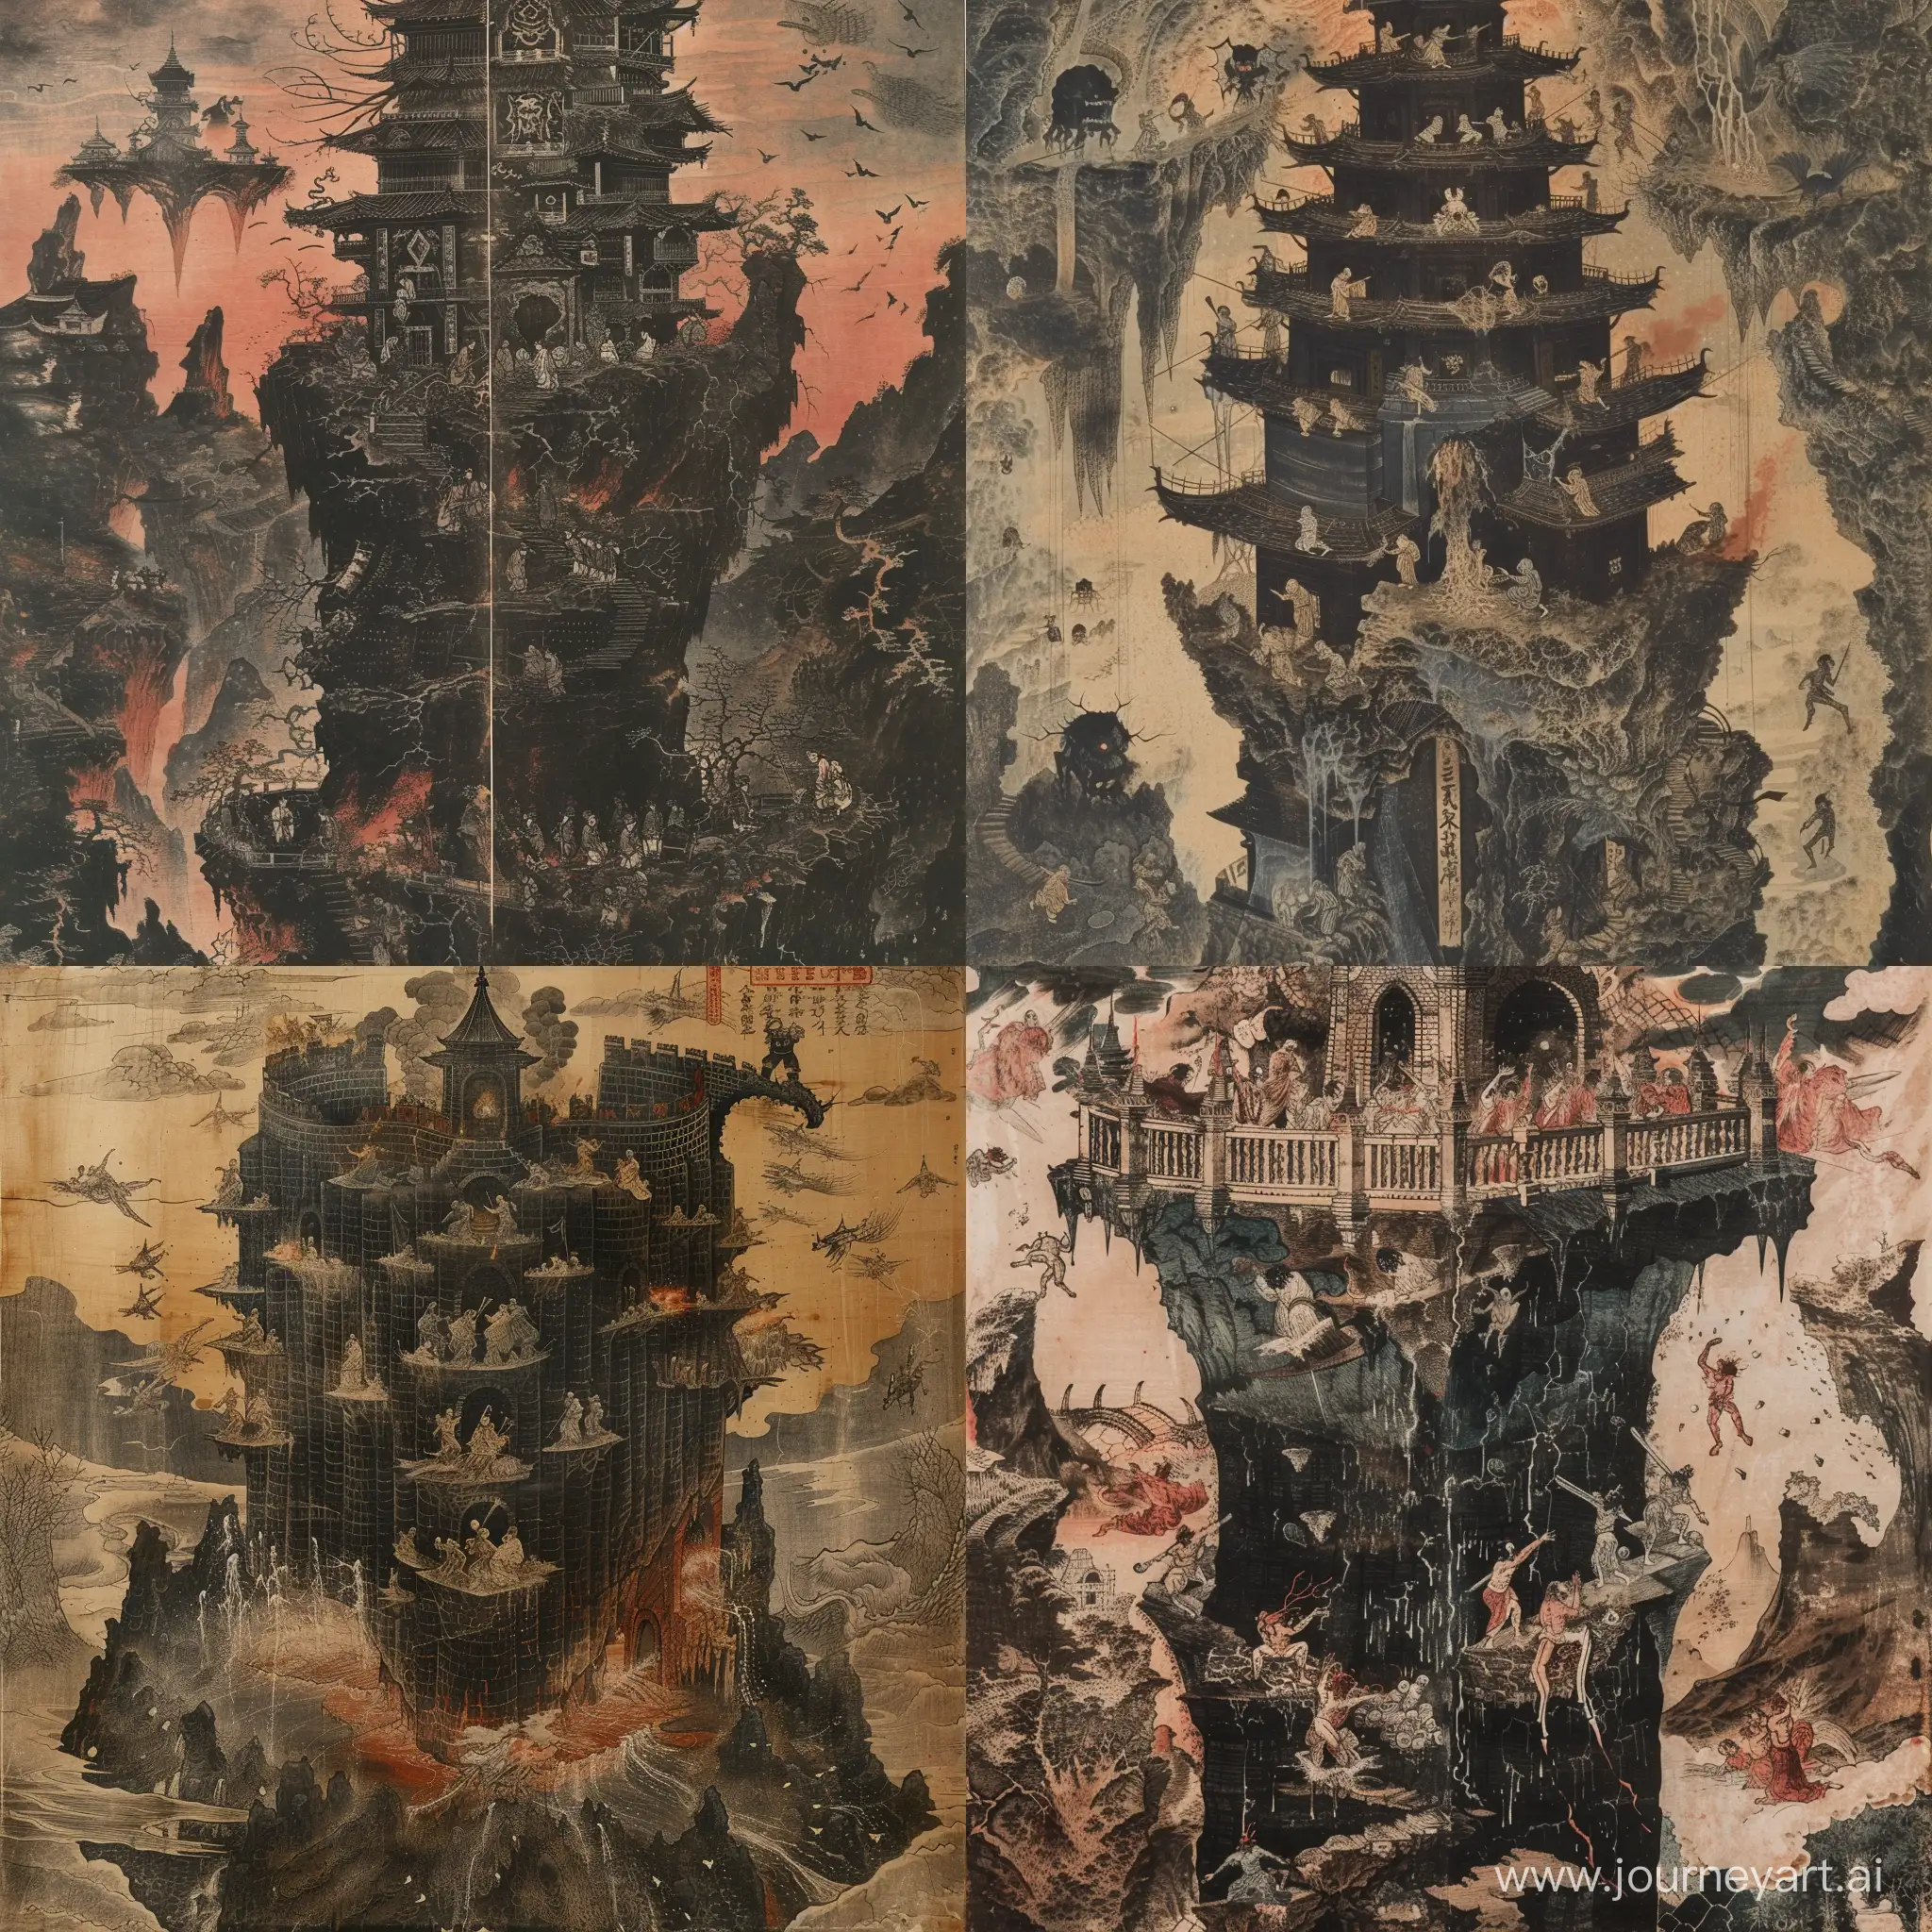 Malevolent-UkiyoE-Fortress-Sinners-Torment-in-Vintage-Japanese-Style